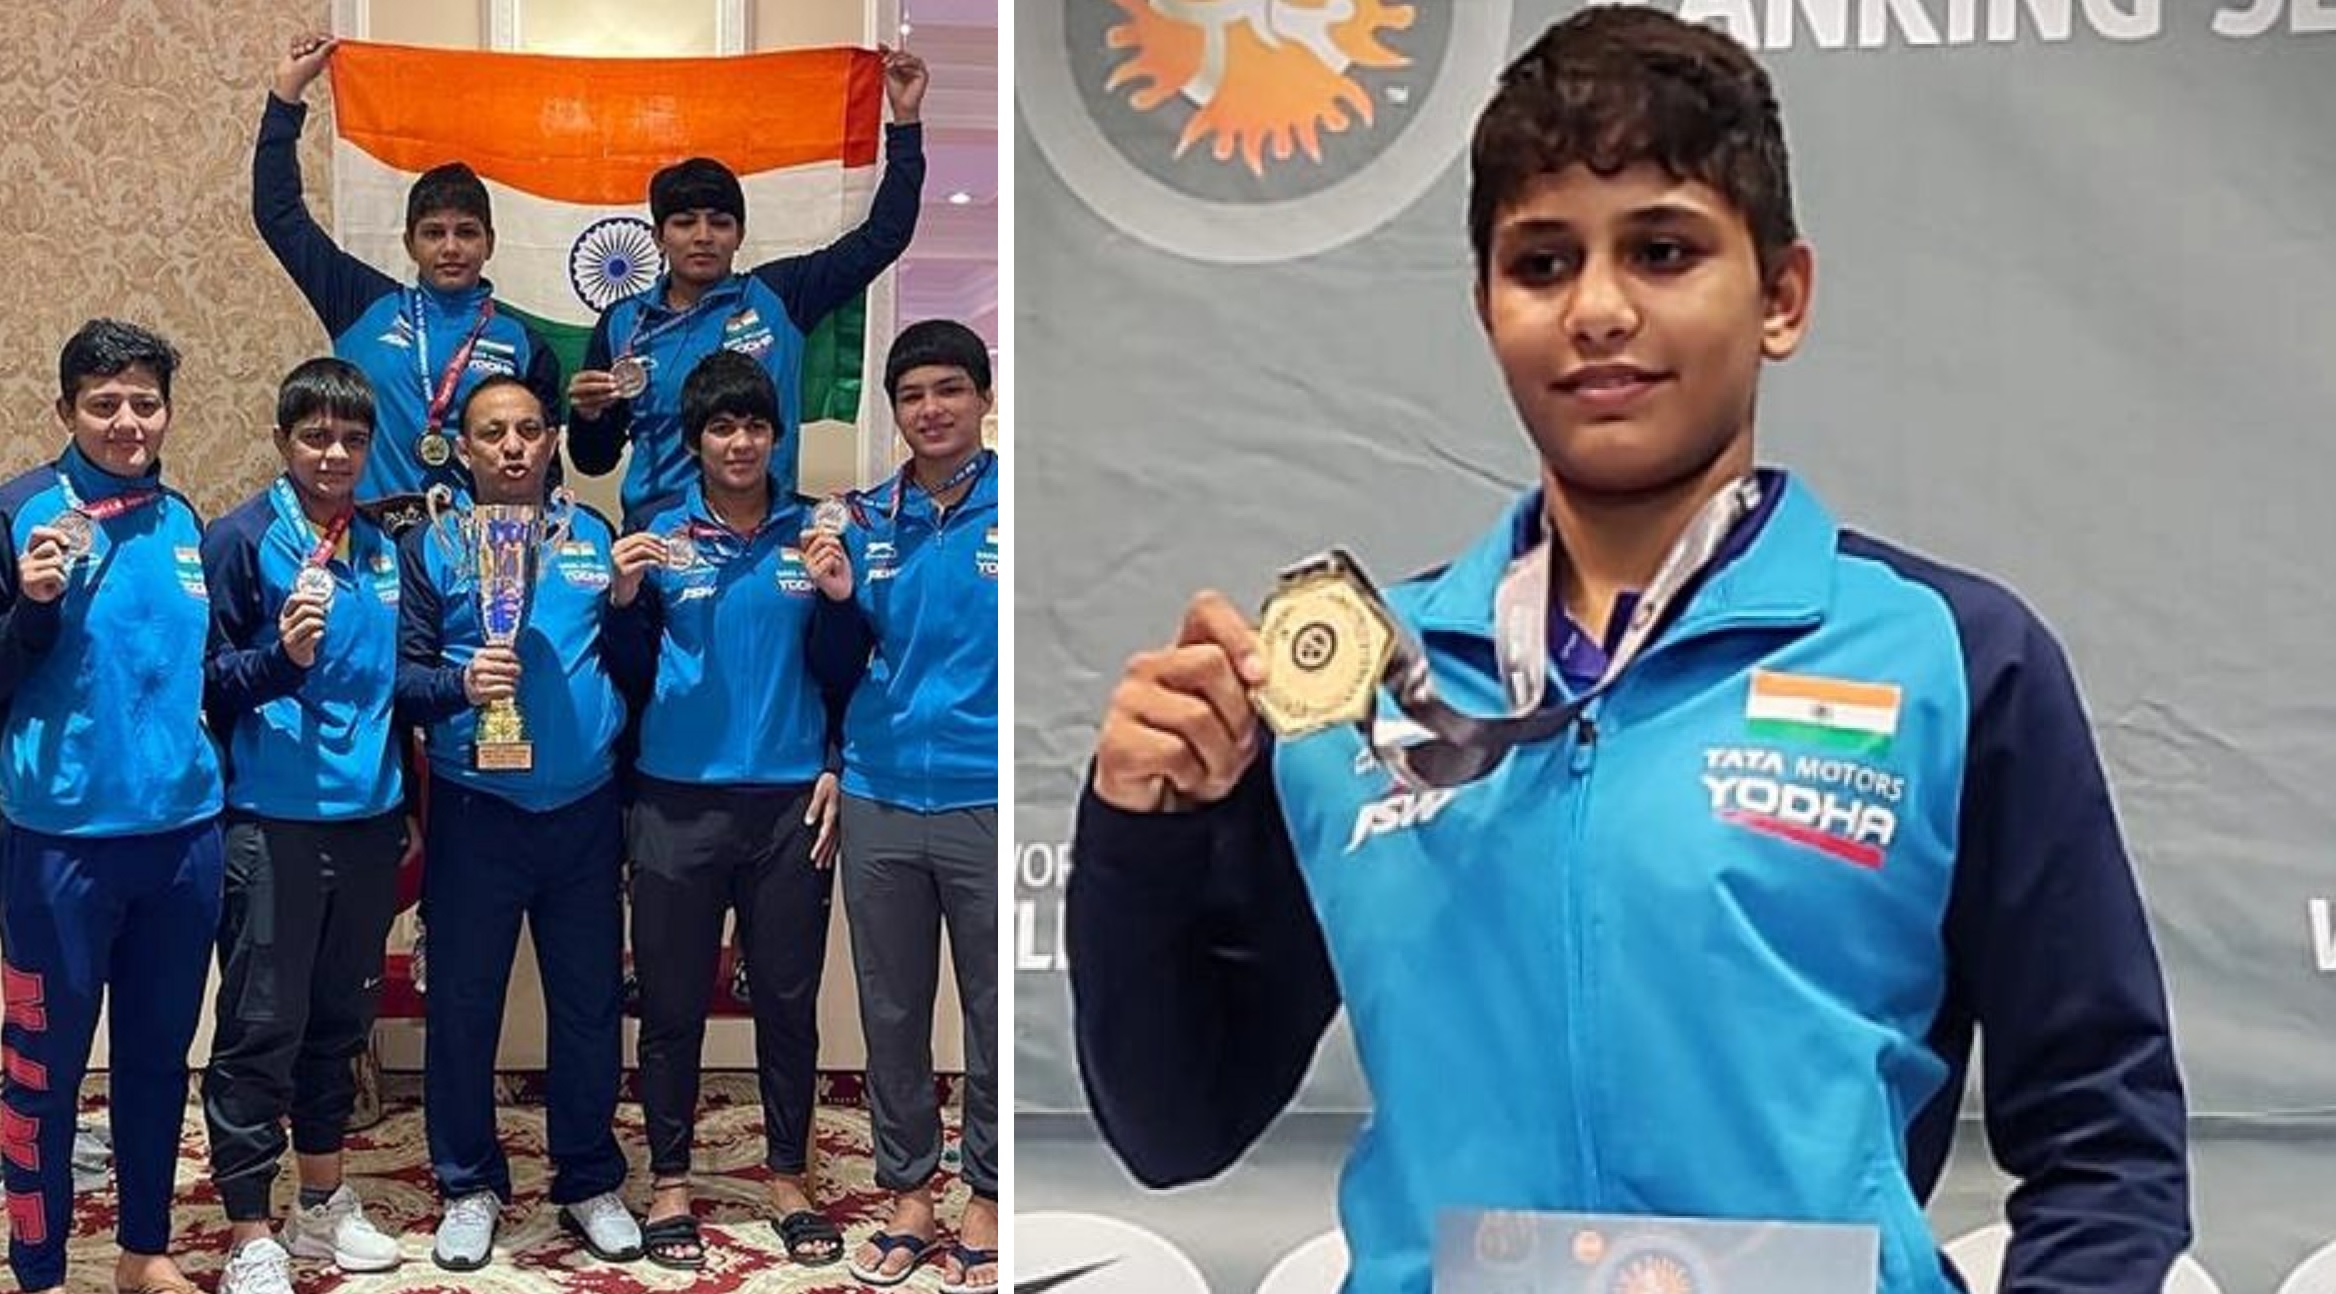 This Young Girl From Haryana Has Created History As India’s First-Ever Woman U-20 Wrestling Champion